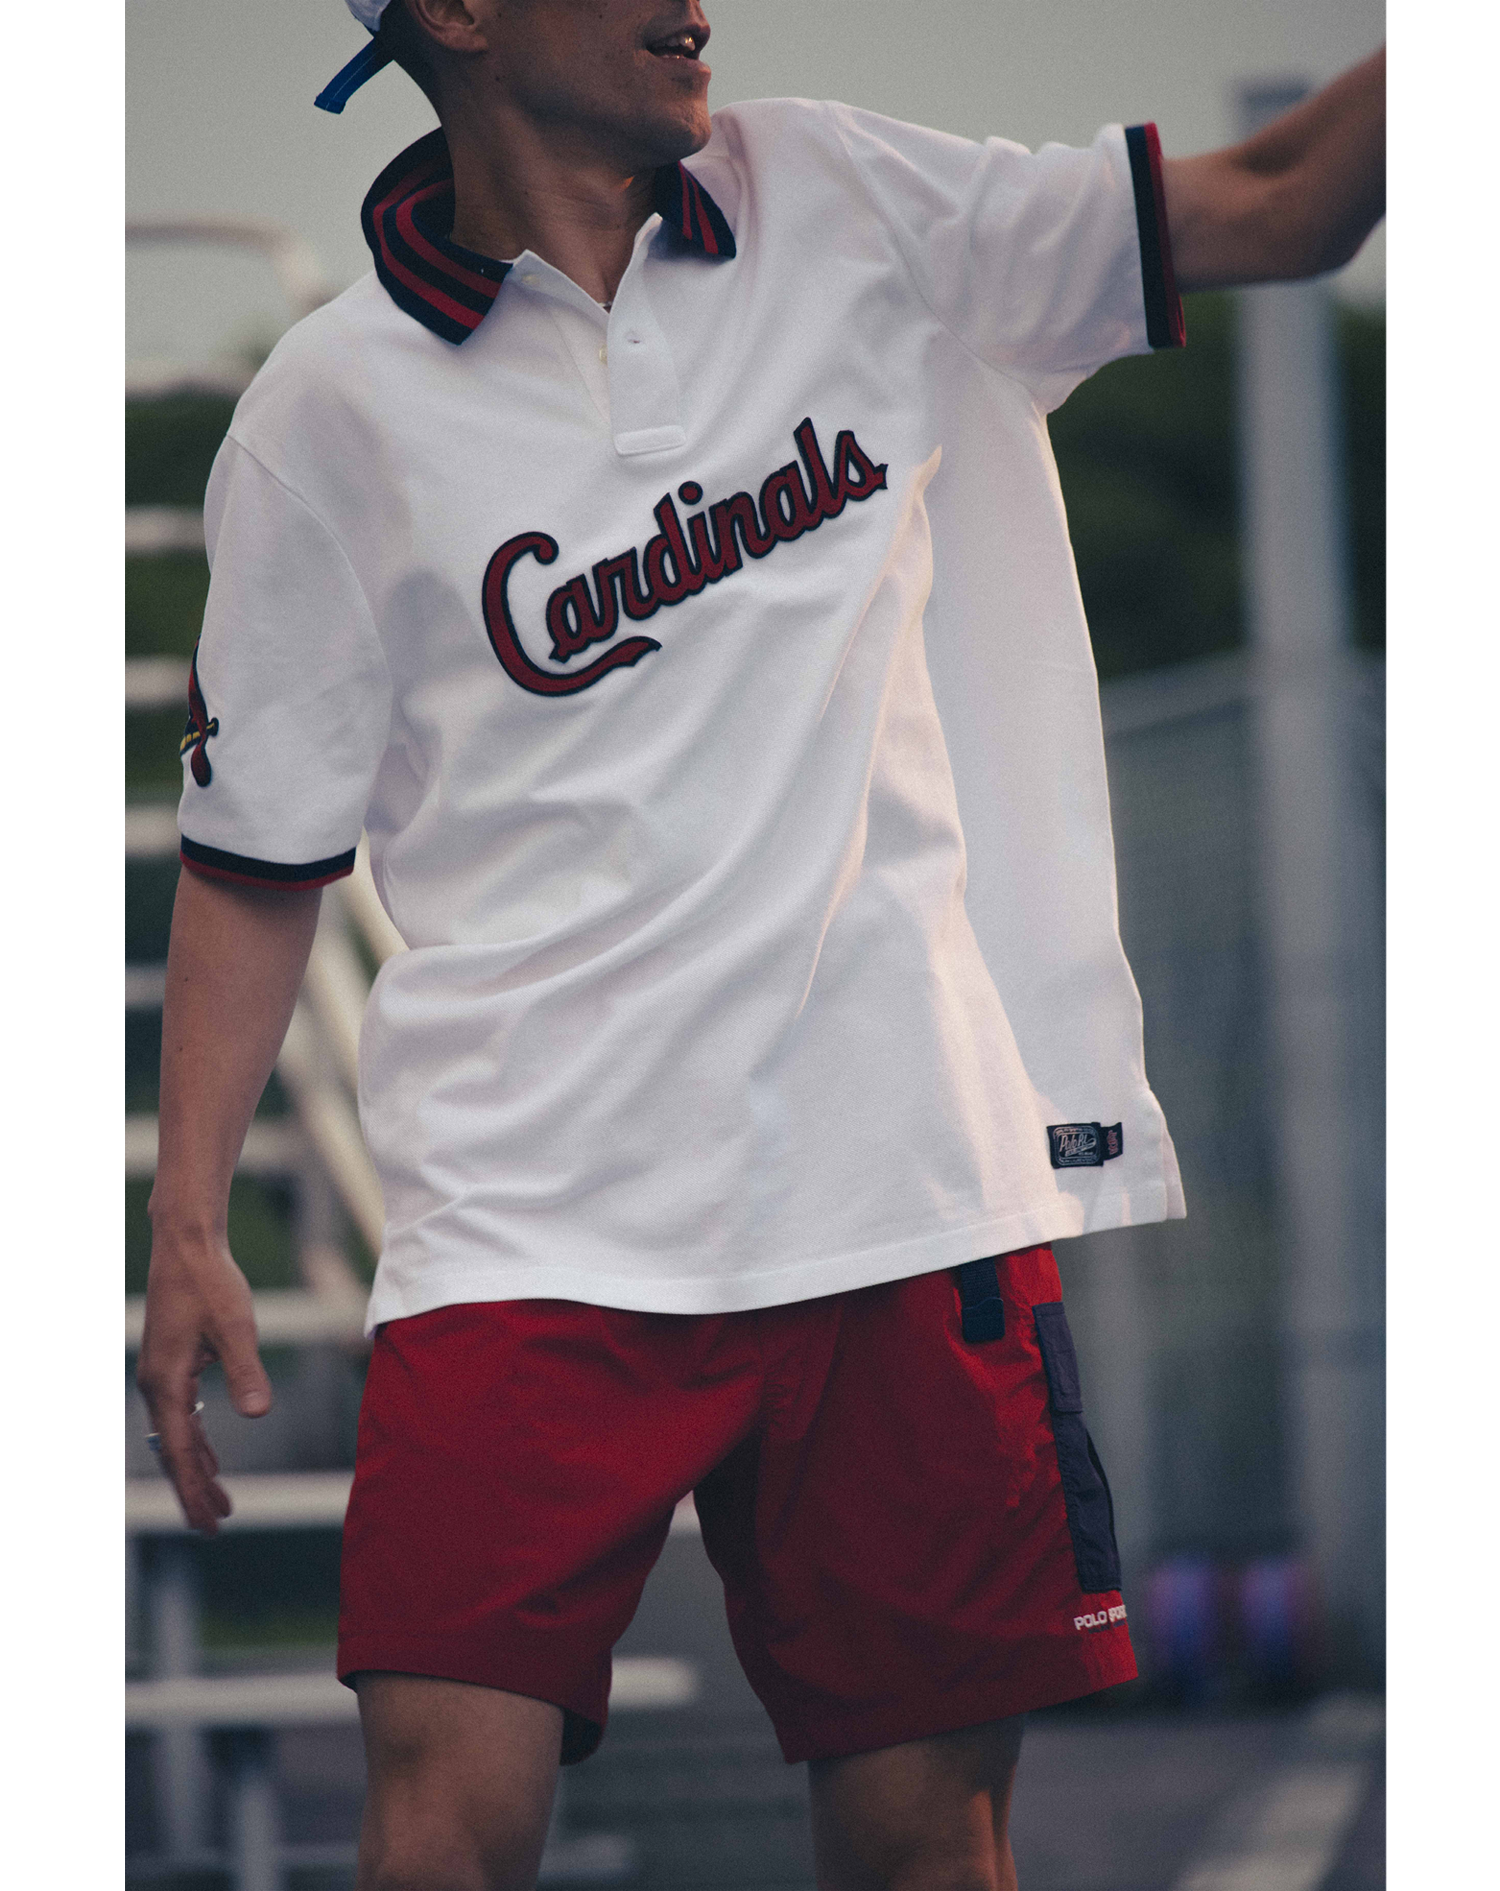 POLO RALPH LAUREN × MLB CAPSULE COLLECTION | SWAG HOMMES